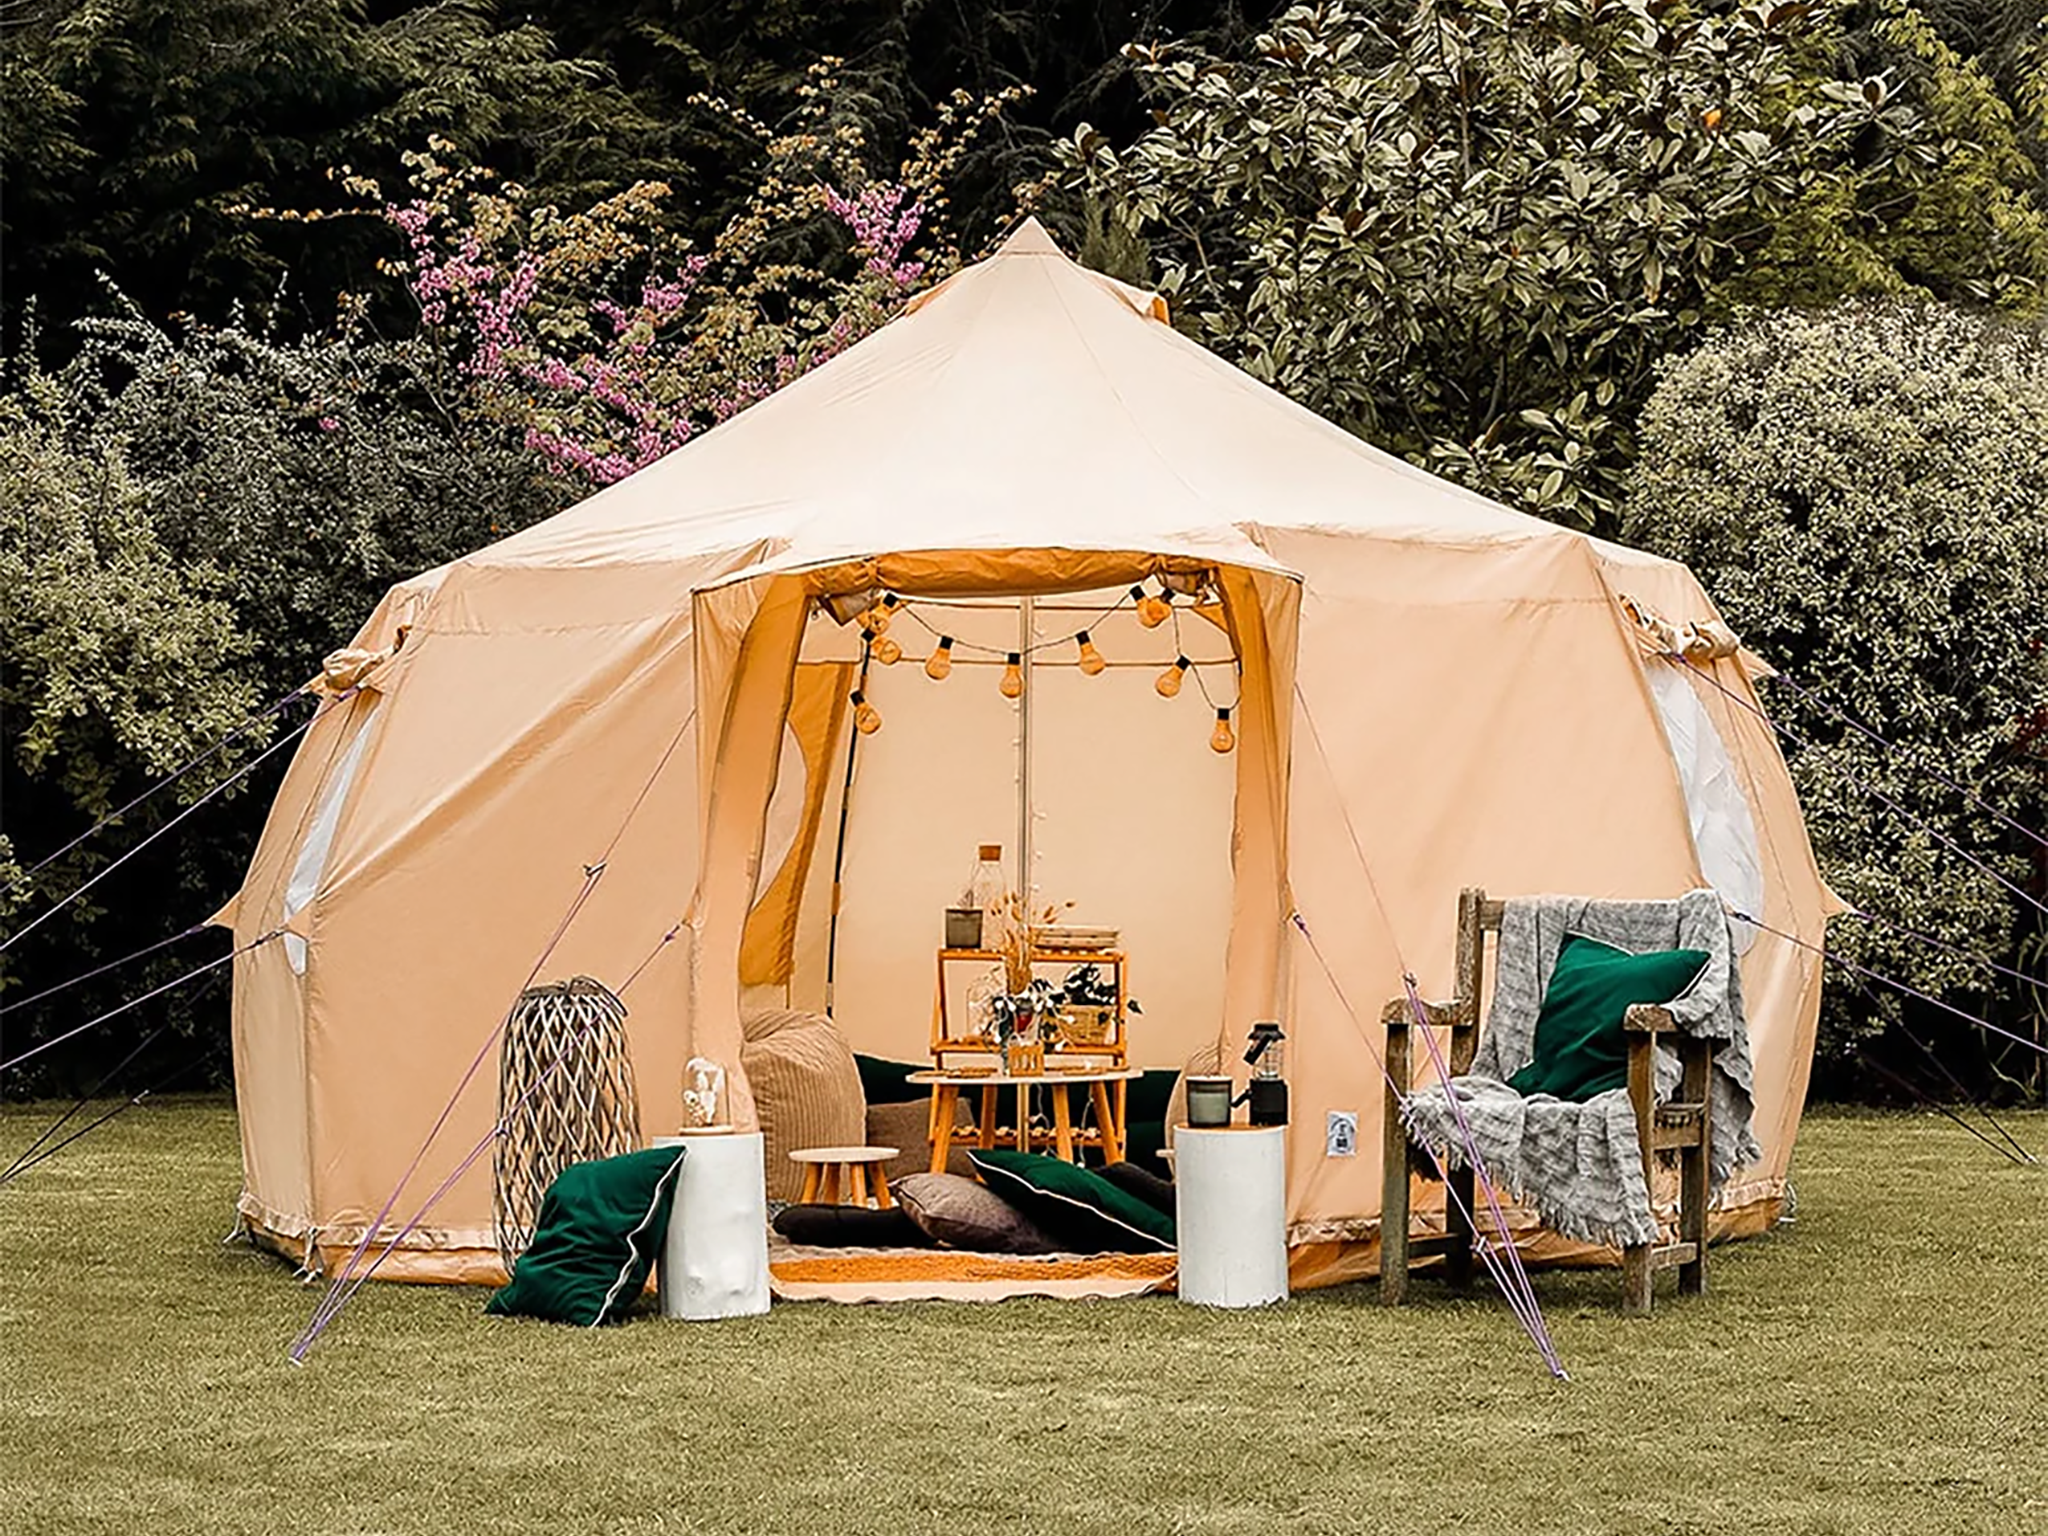 File photo of a glamping tent